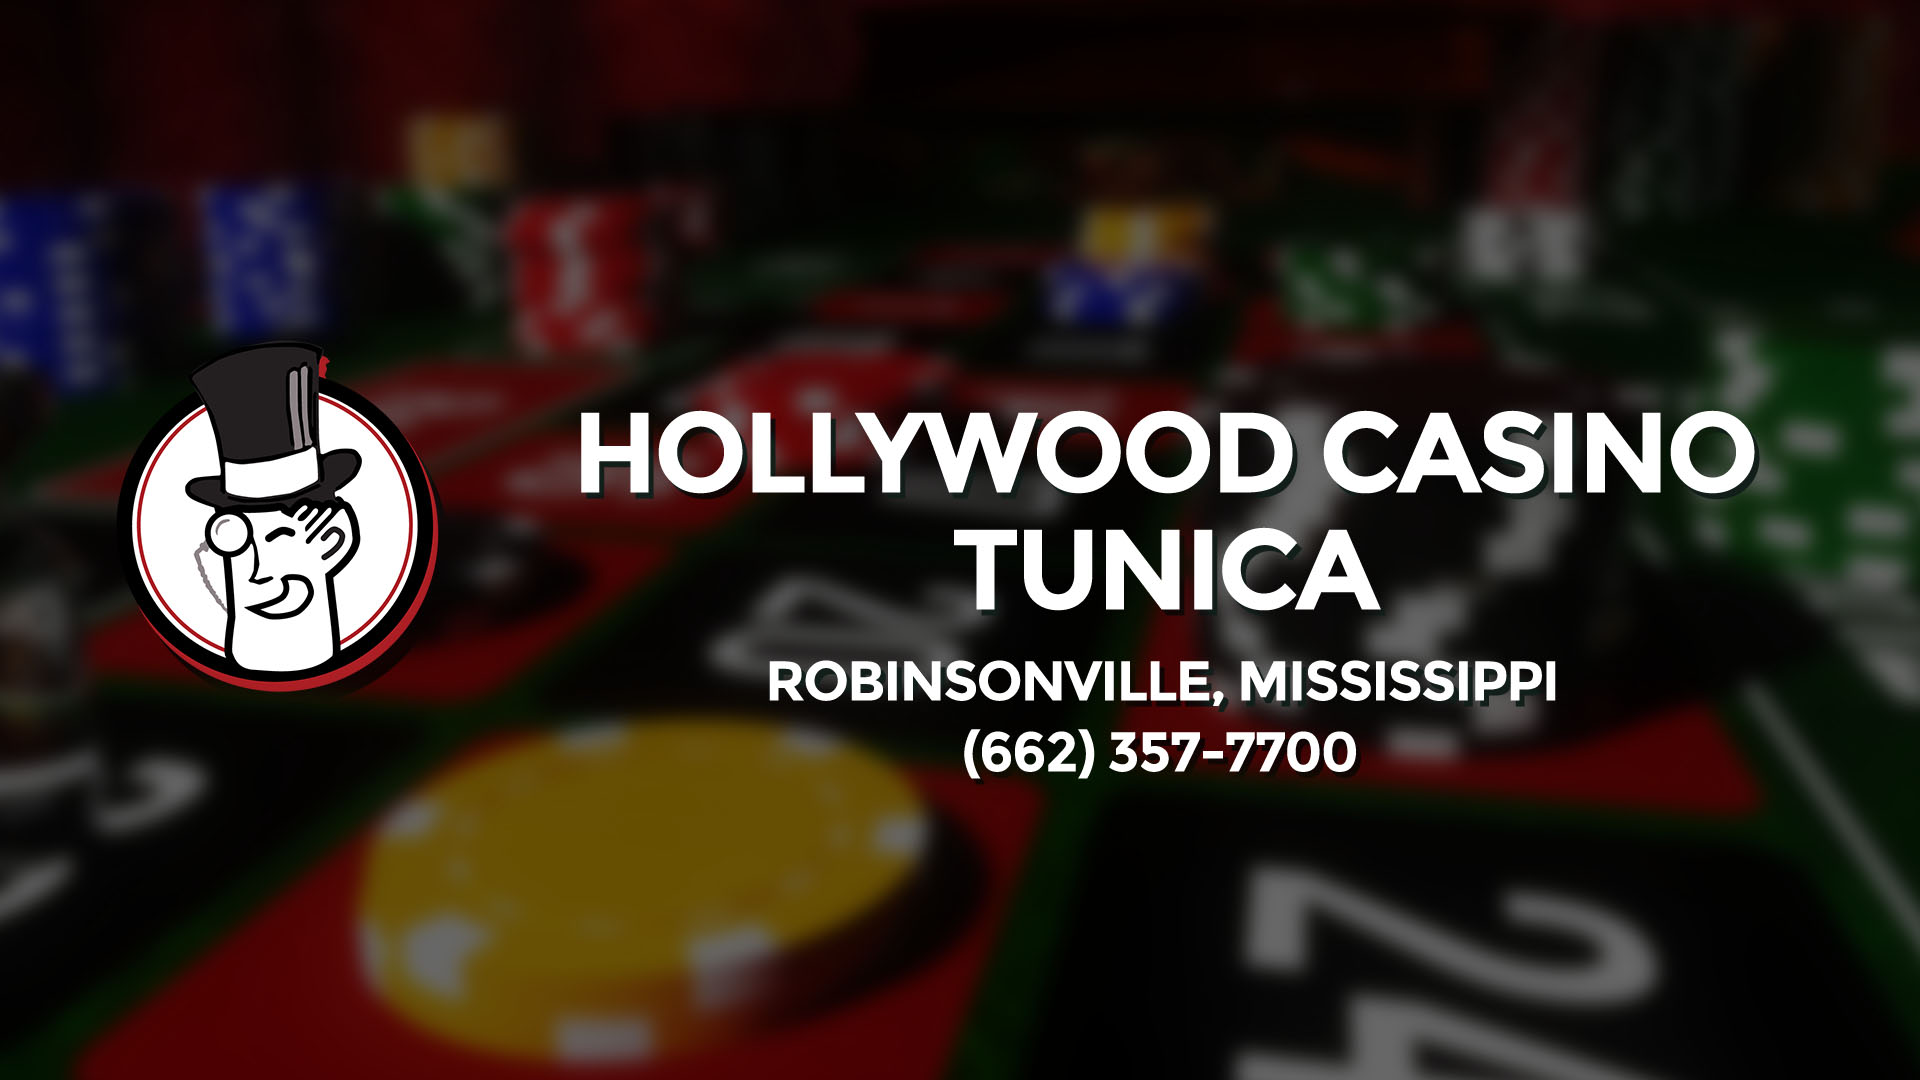 directions to hollywood casino tunica mississippi